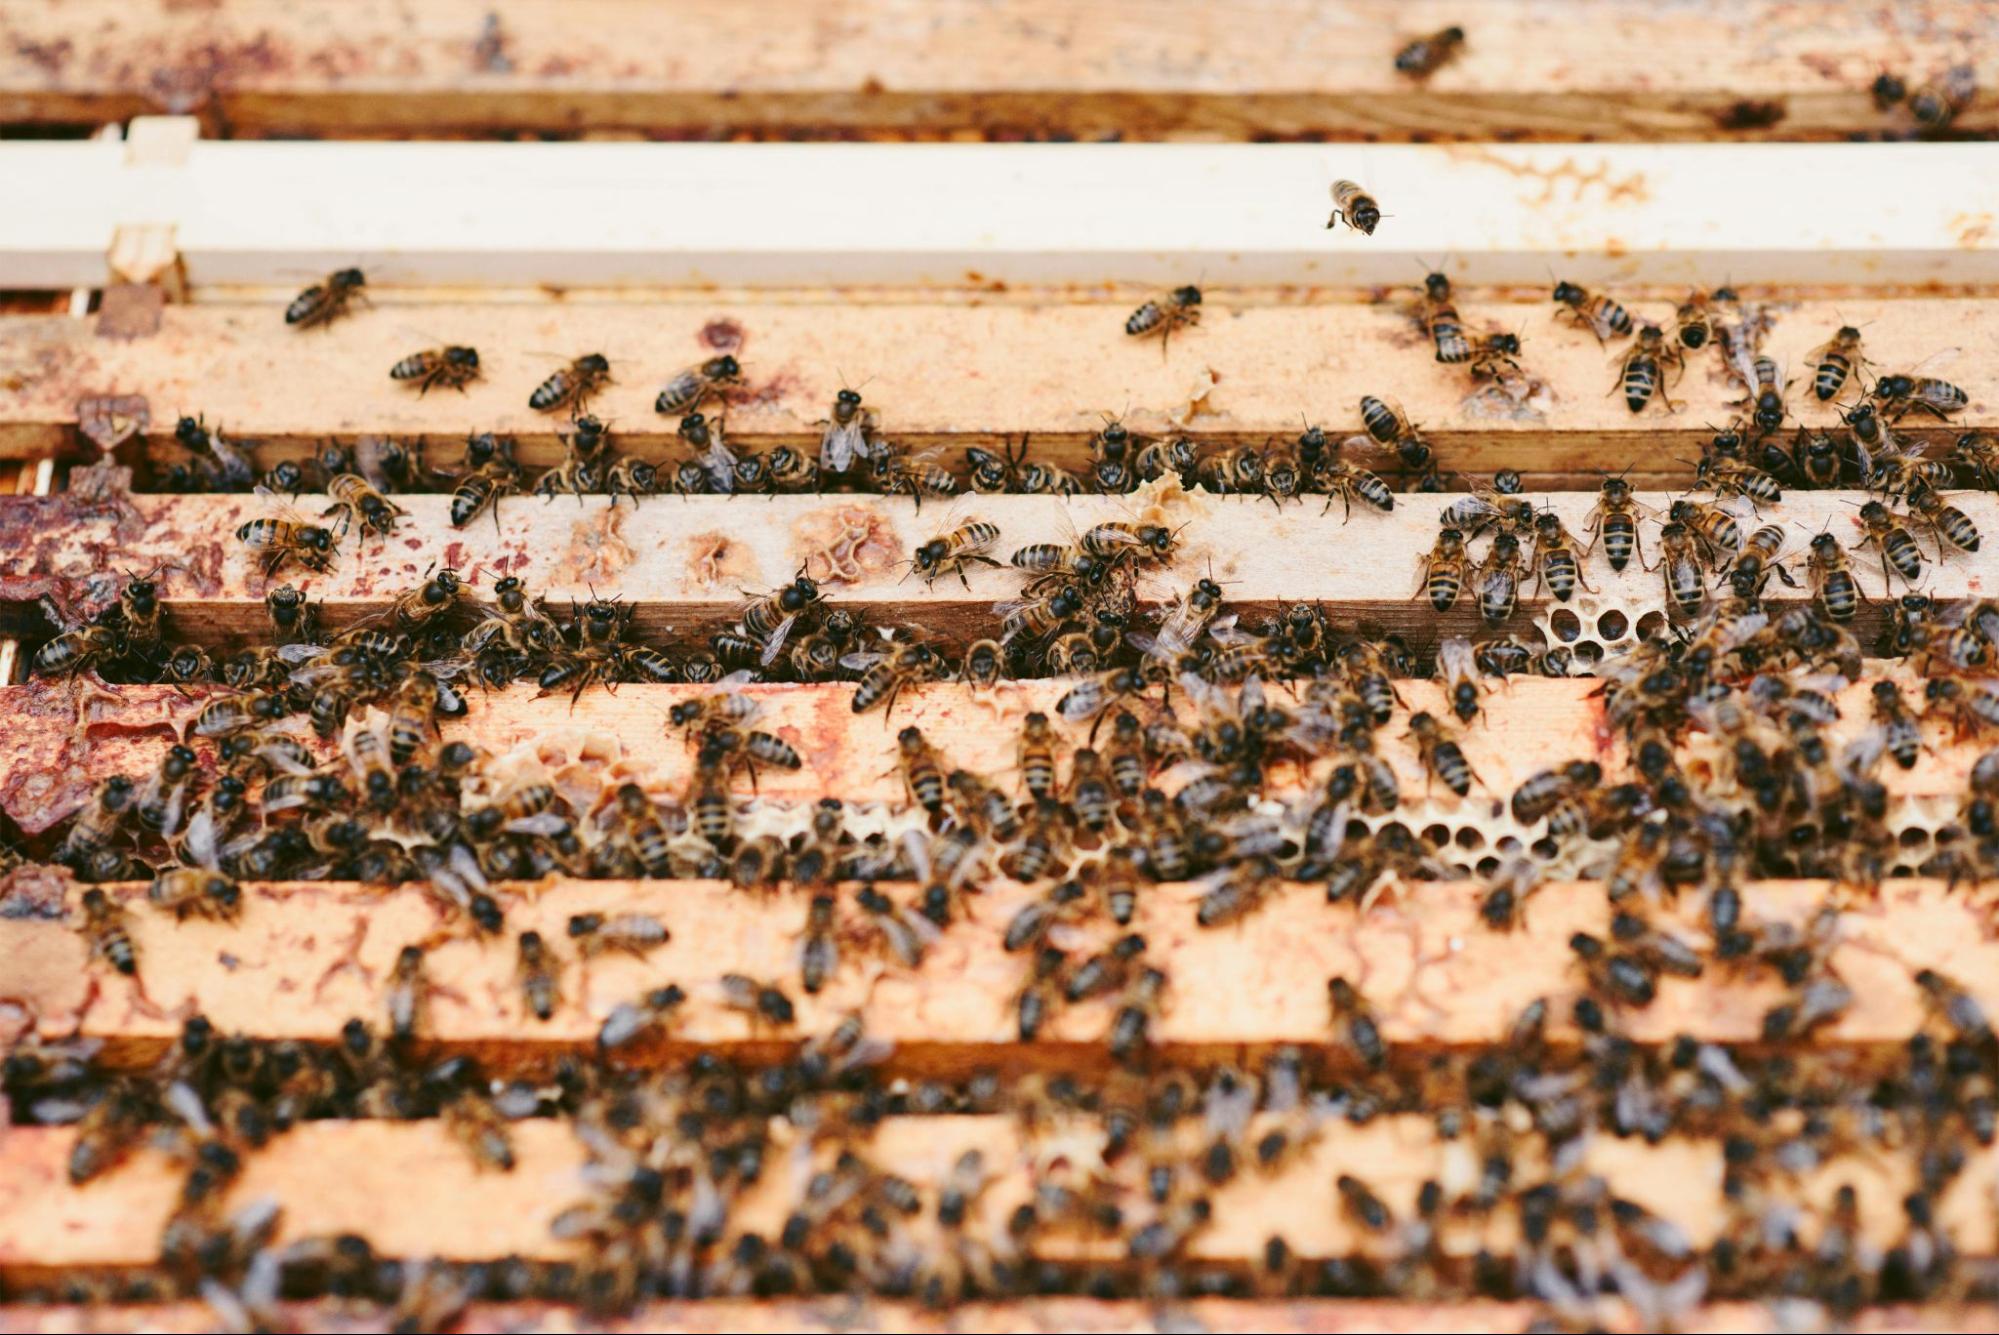 bees swarming on honeycomb frames